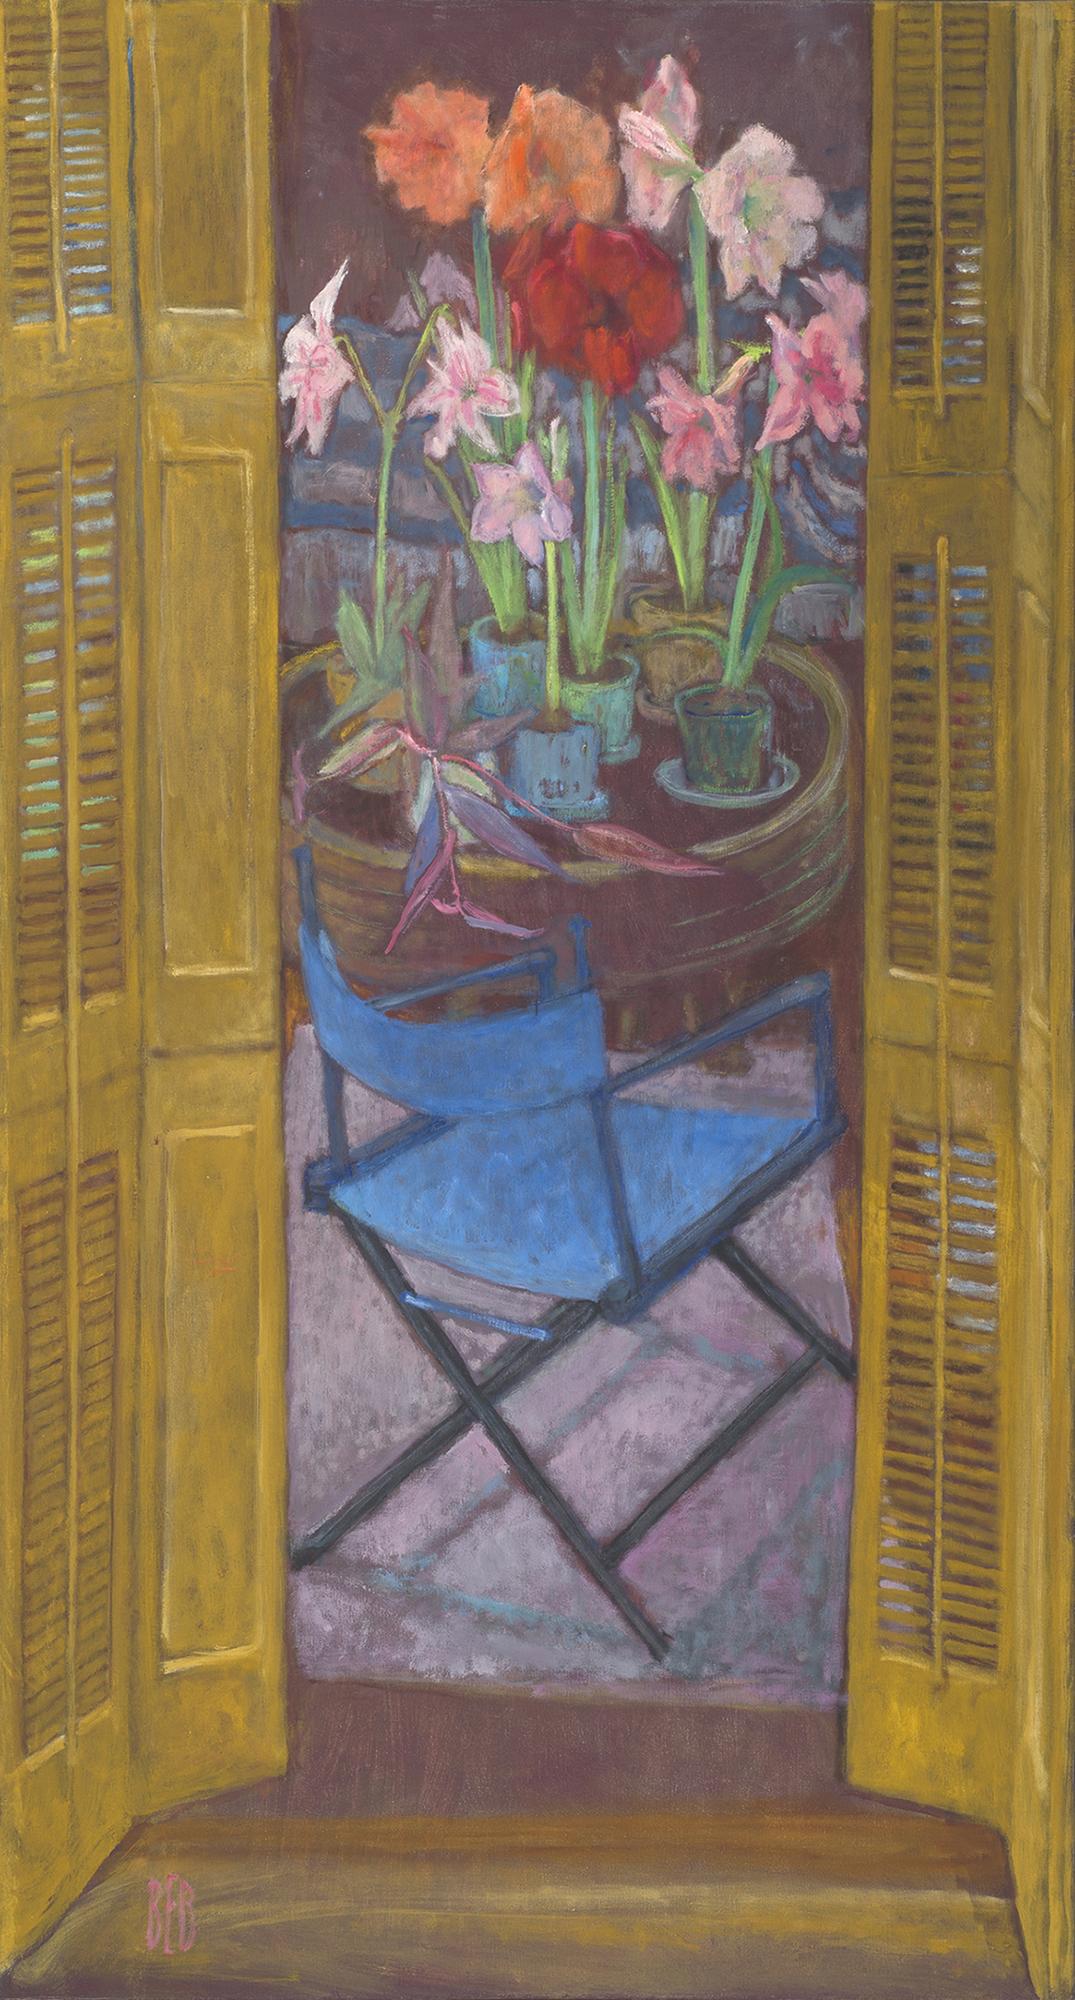 Blue Chair with Amaryllis in pot, looking through doors